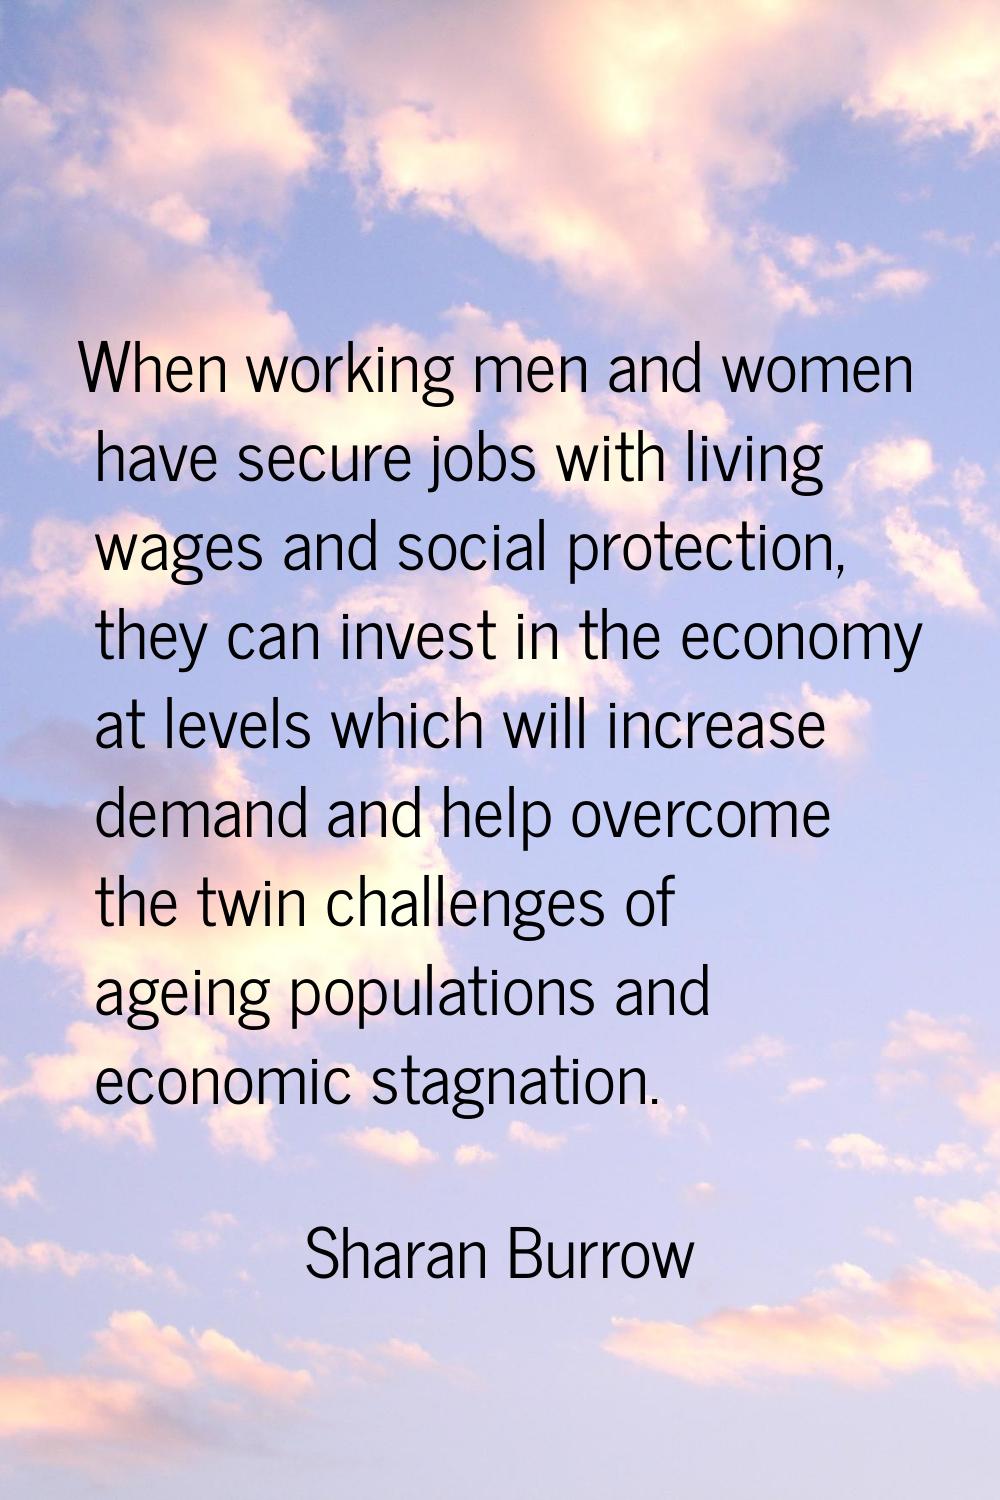 When working men and women have secure jobs with living wages and social protection, they can inves